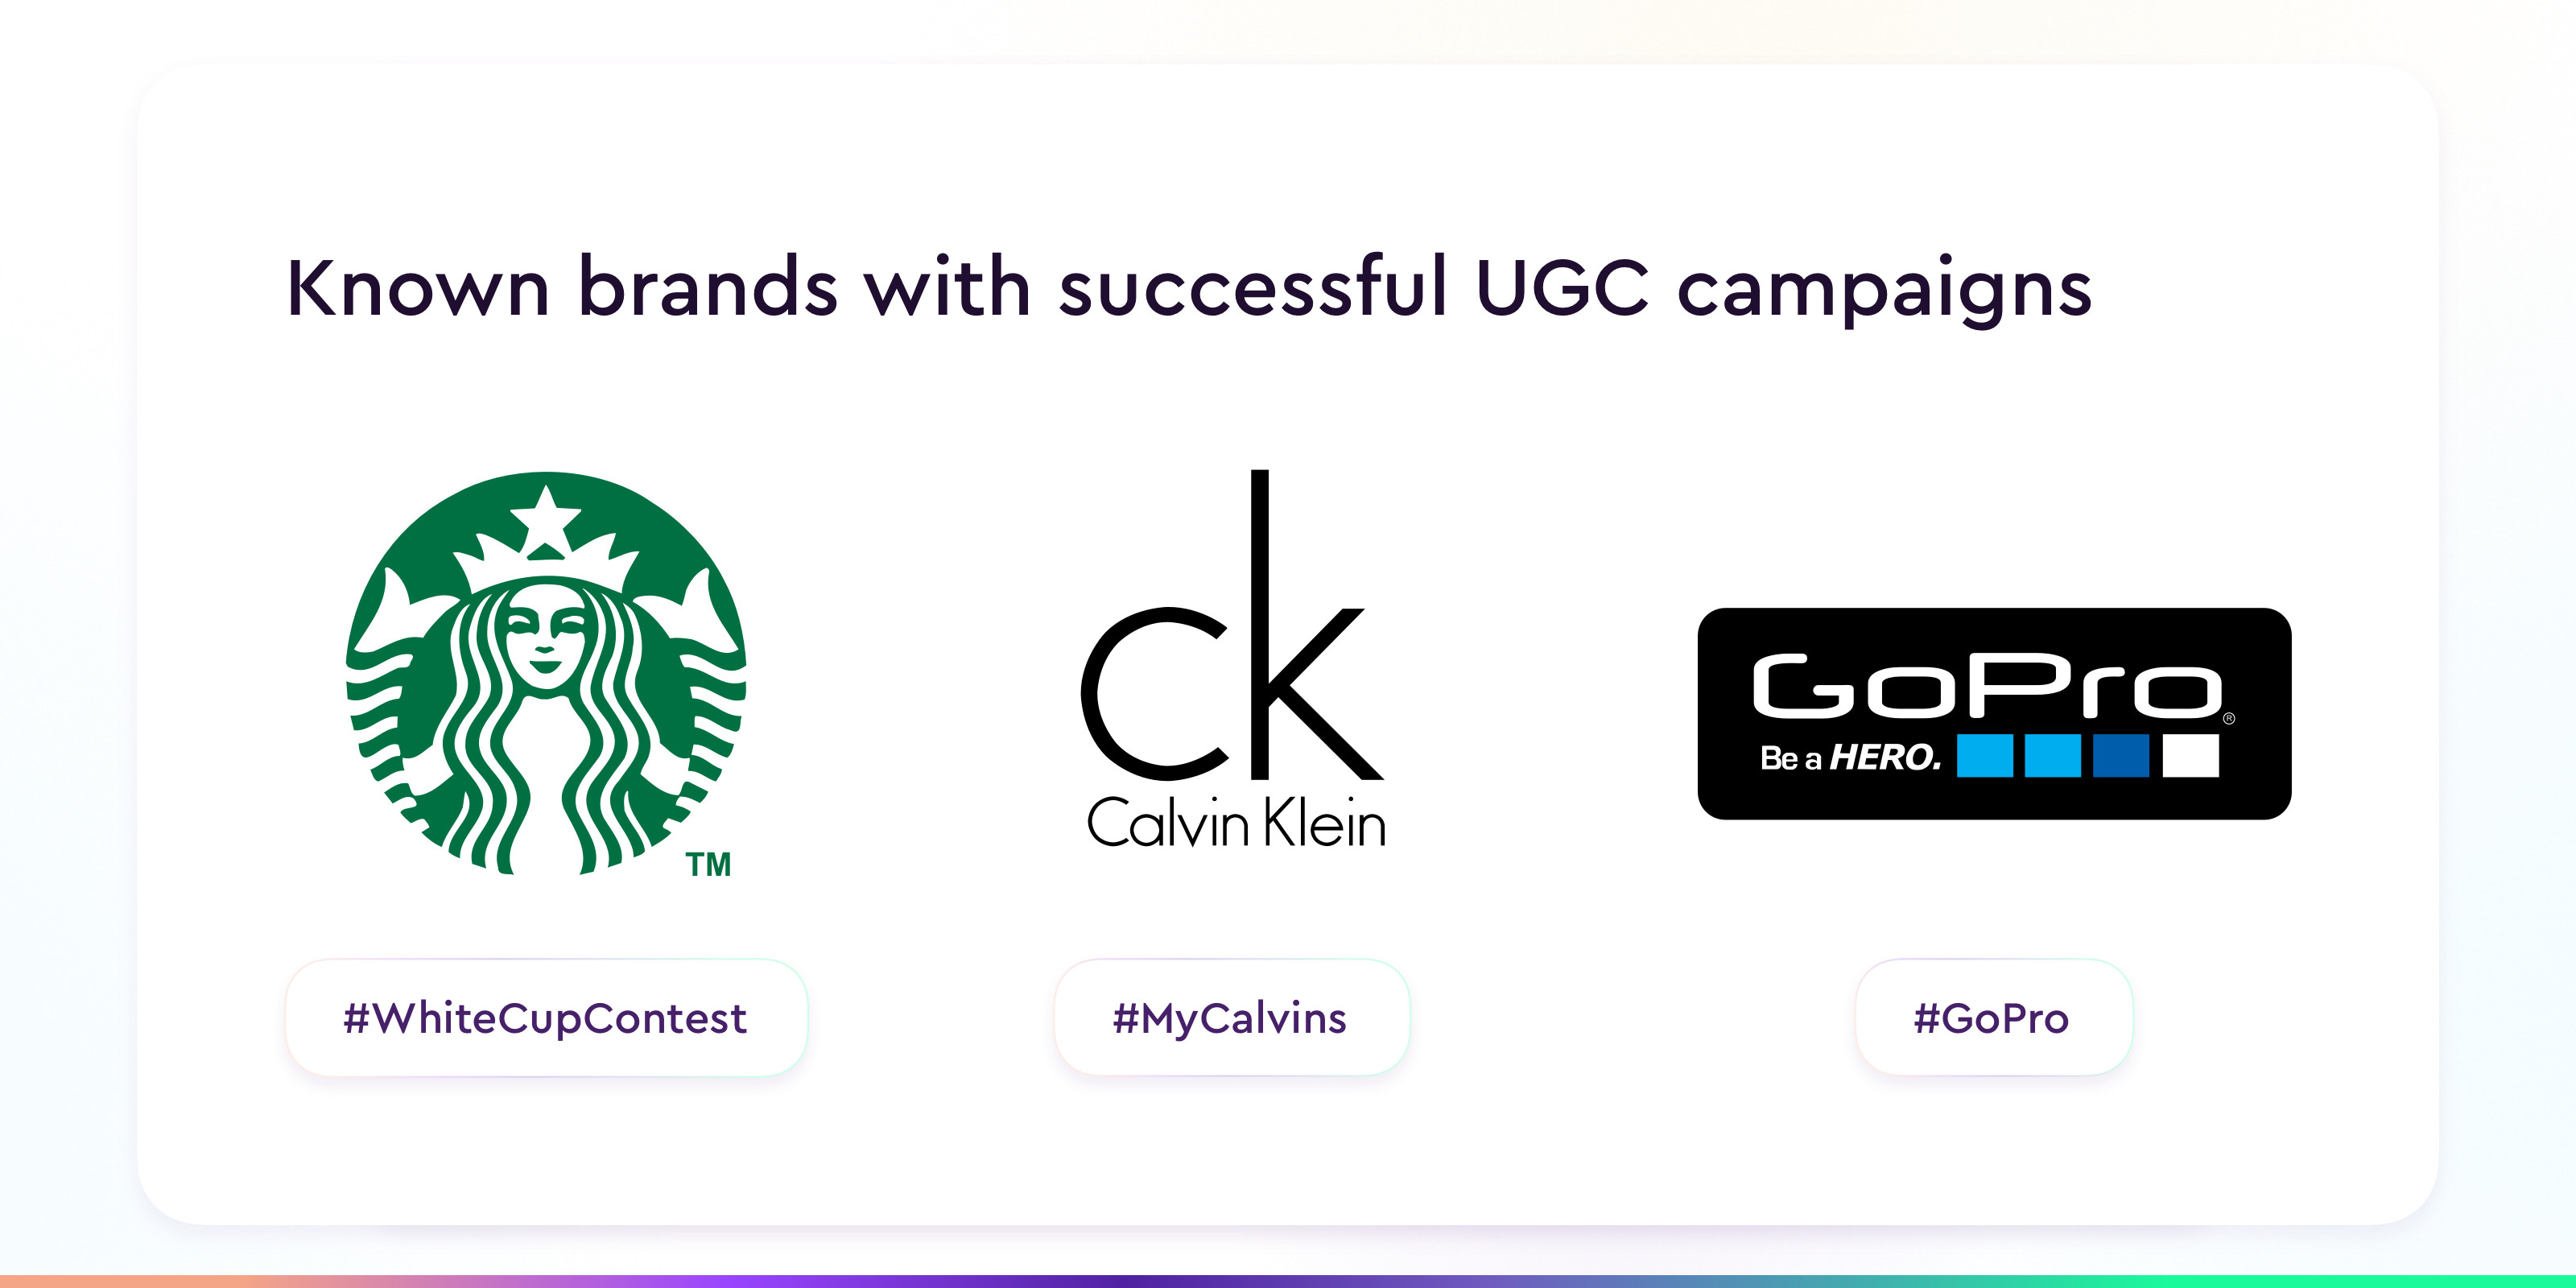 User-generated content - known brands with succesful campaigns.